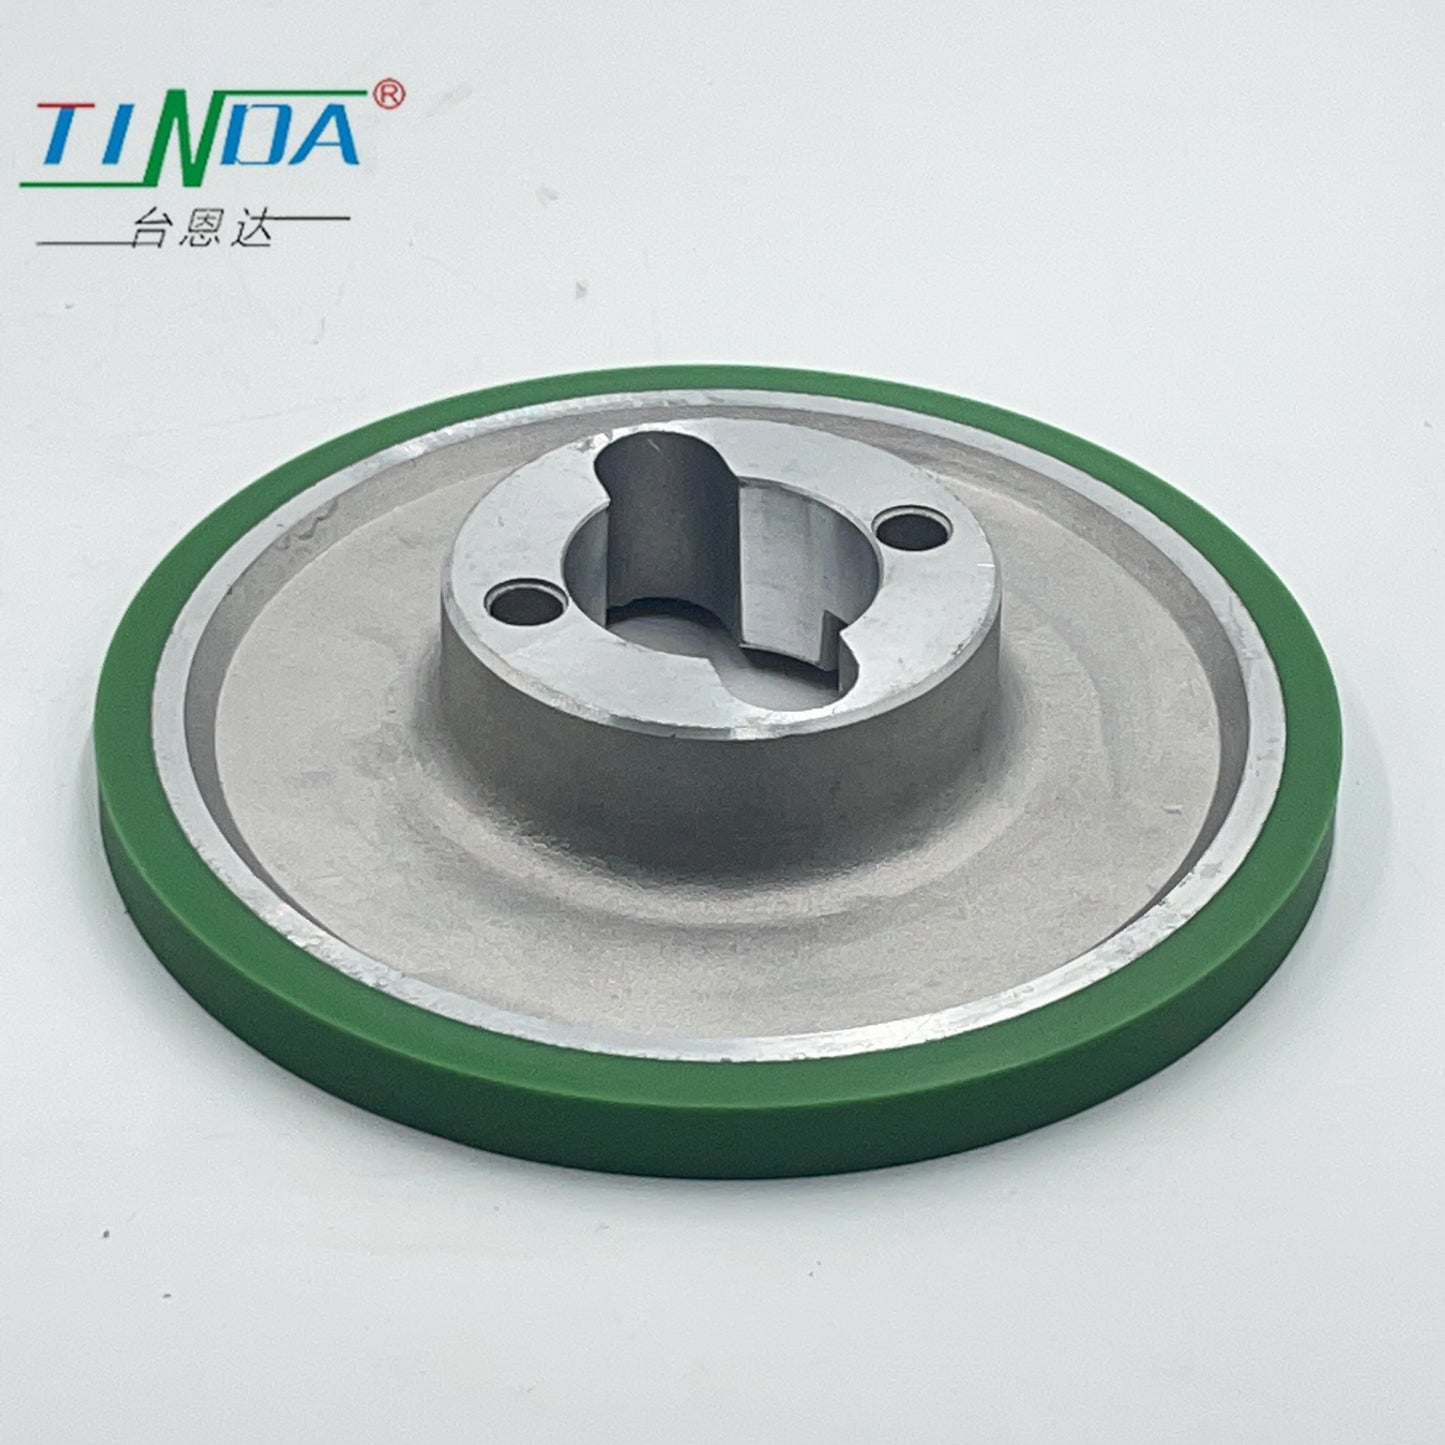 Russia Woodworking Machine Parts  Steel And Polyurethane Hardness Good Grip Wear proof six Spindle rubber wheel